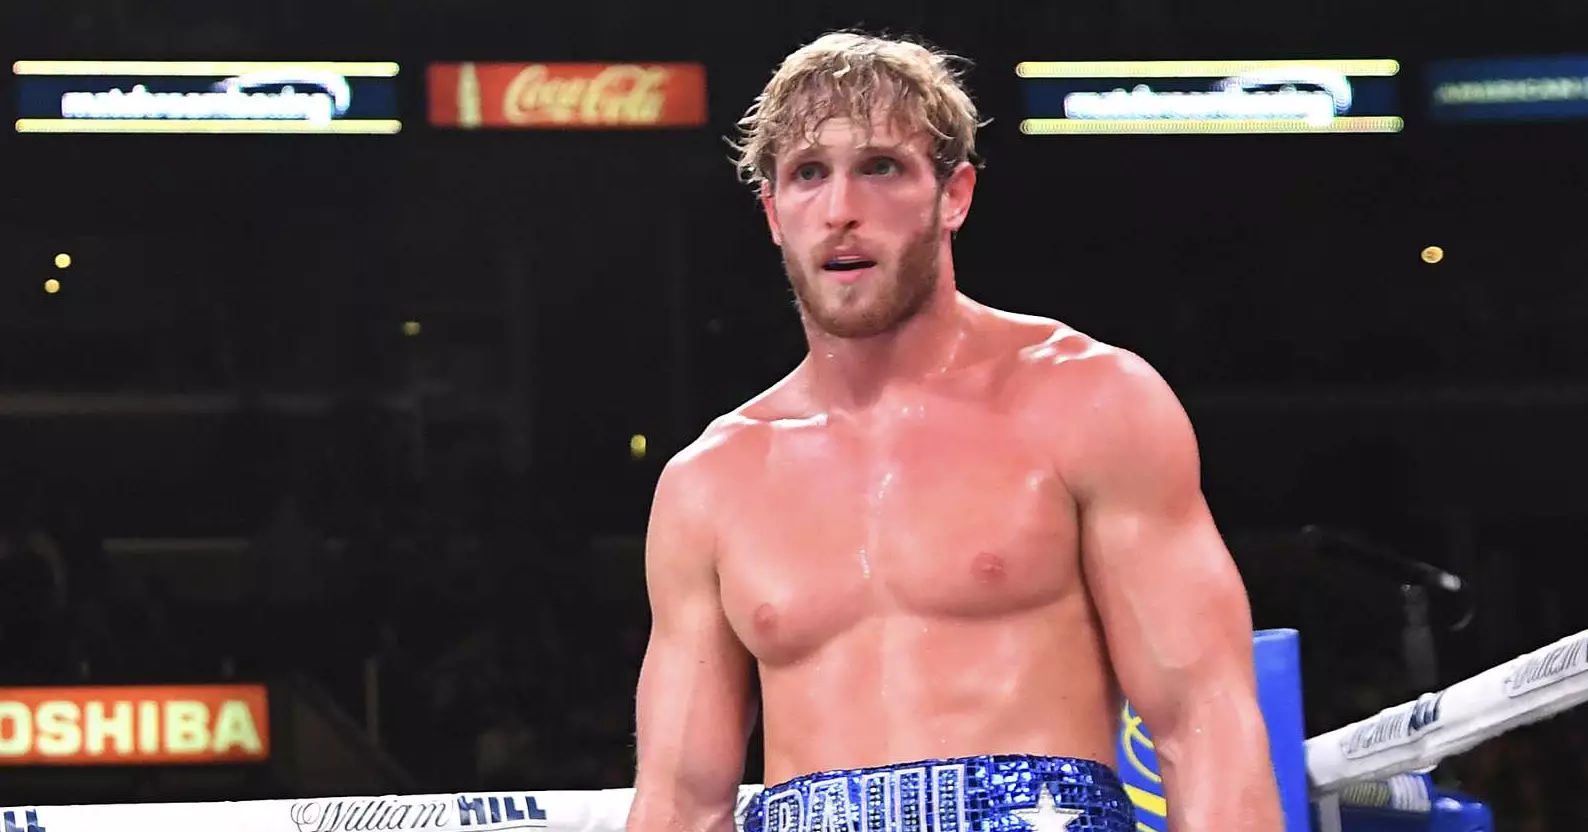 Logan Paul will face boxing legend Floyd Mayweather Jr for an exhibition bout this Sunday in Miami